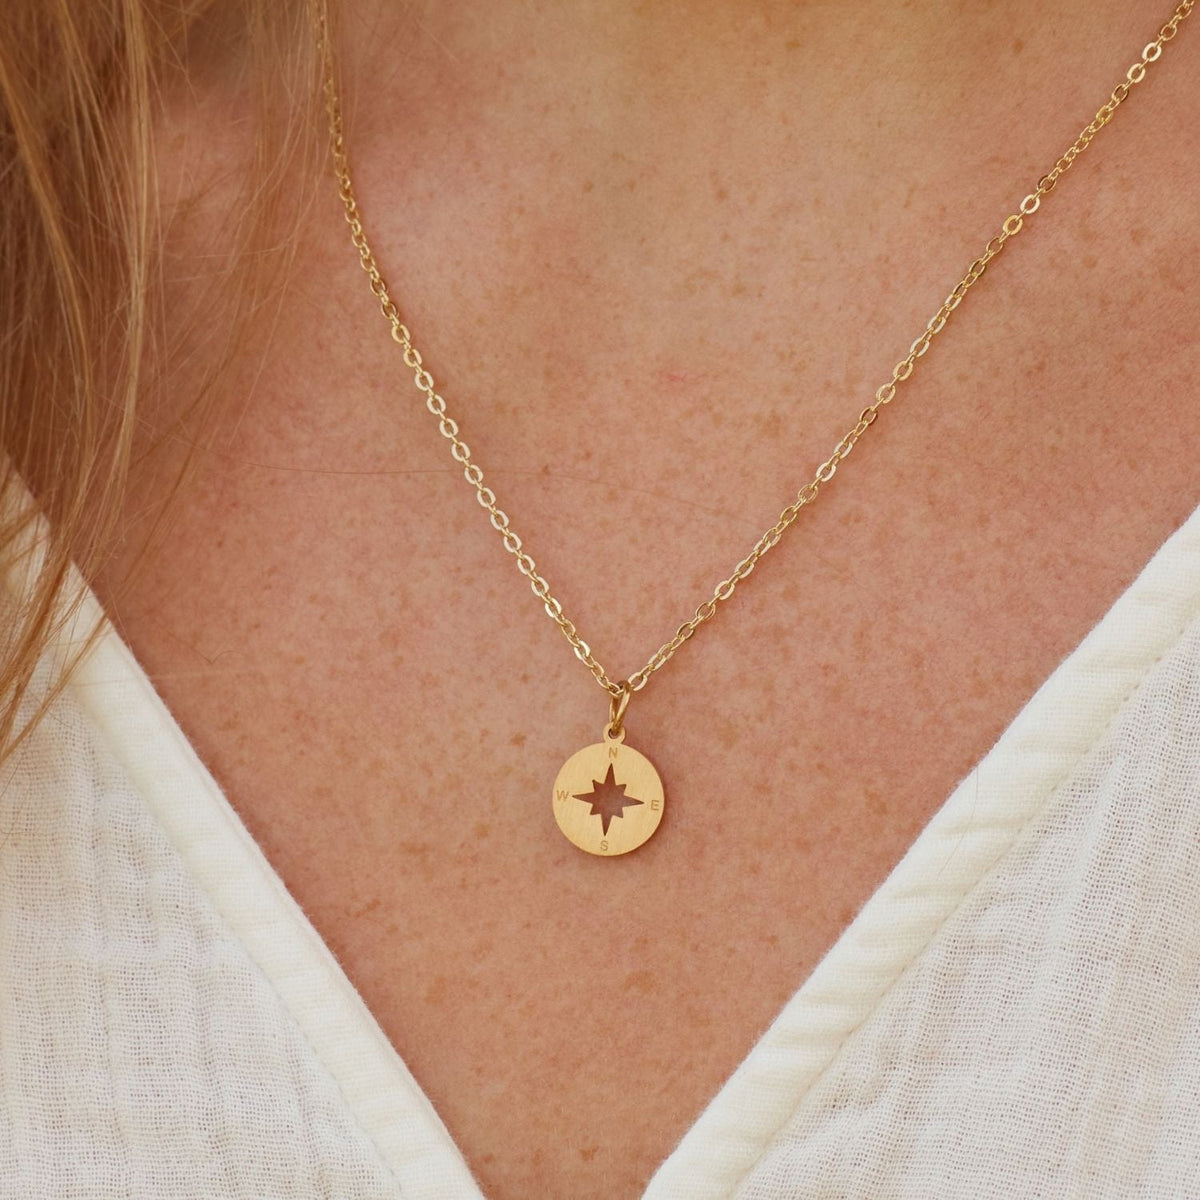 Gift for Bridesmaid | Will You Be My Bridesmaid? | Compass Necklace